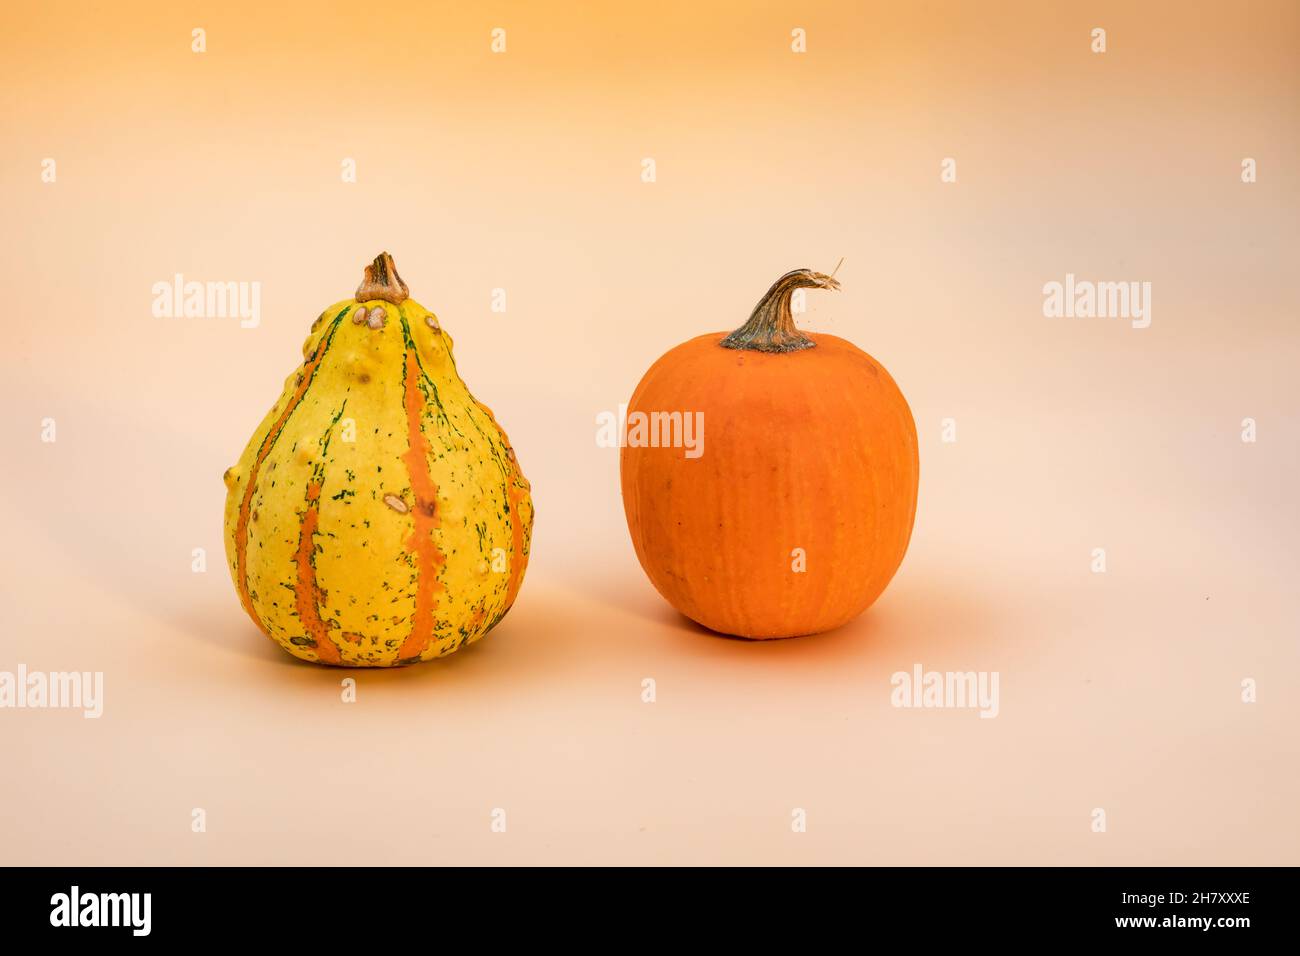 Two decorative pumpkins isolated against a beige background Stock Photo